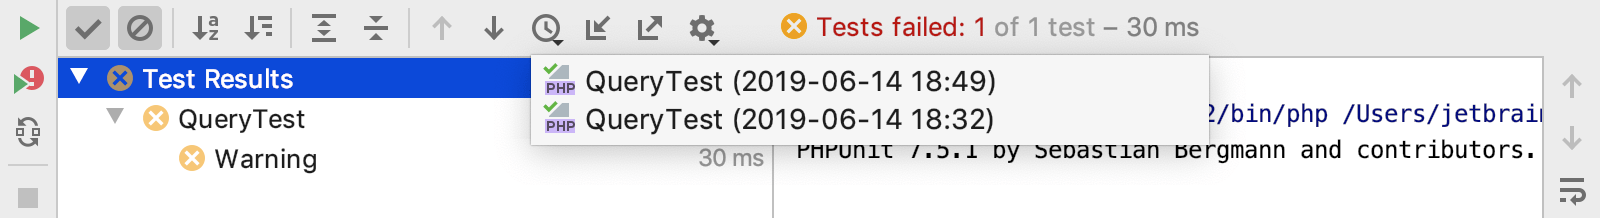 Viewing results of previous tests